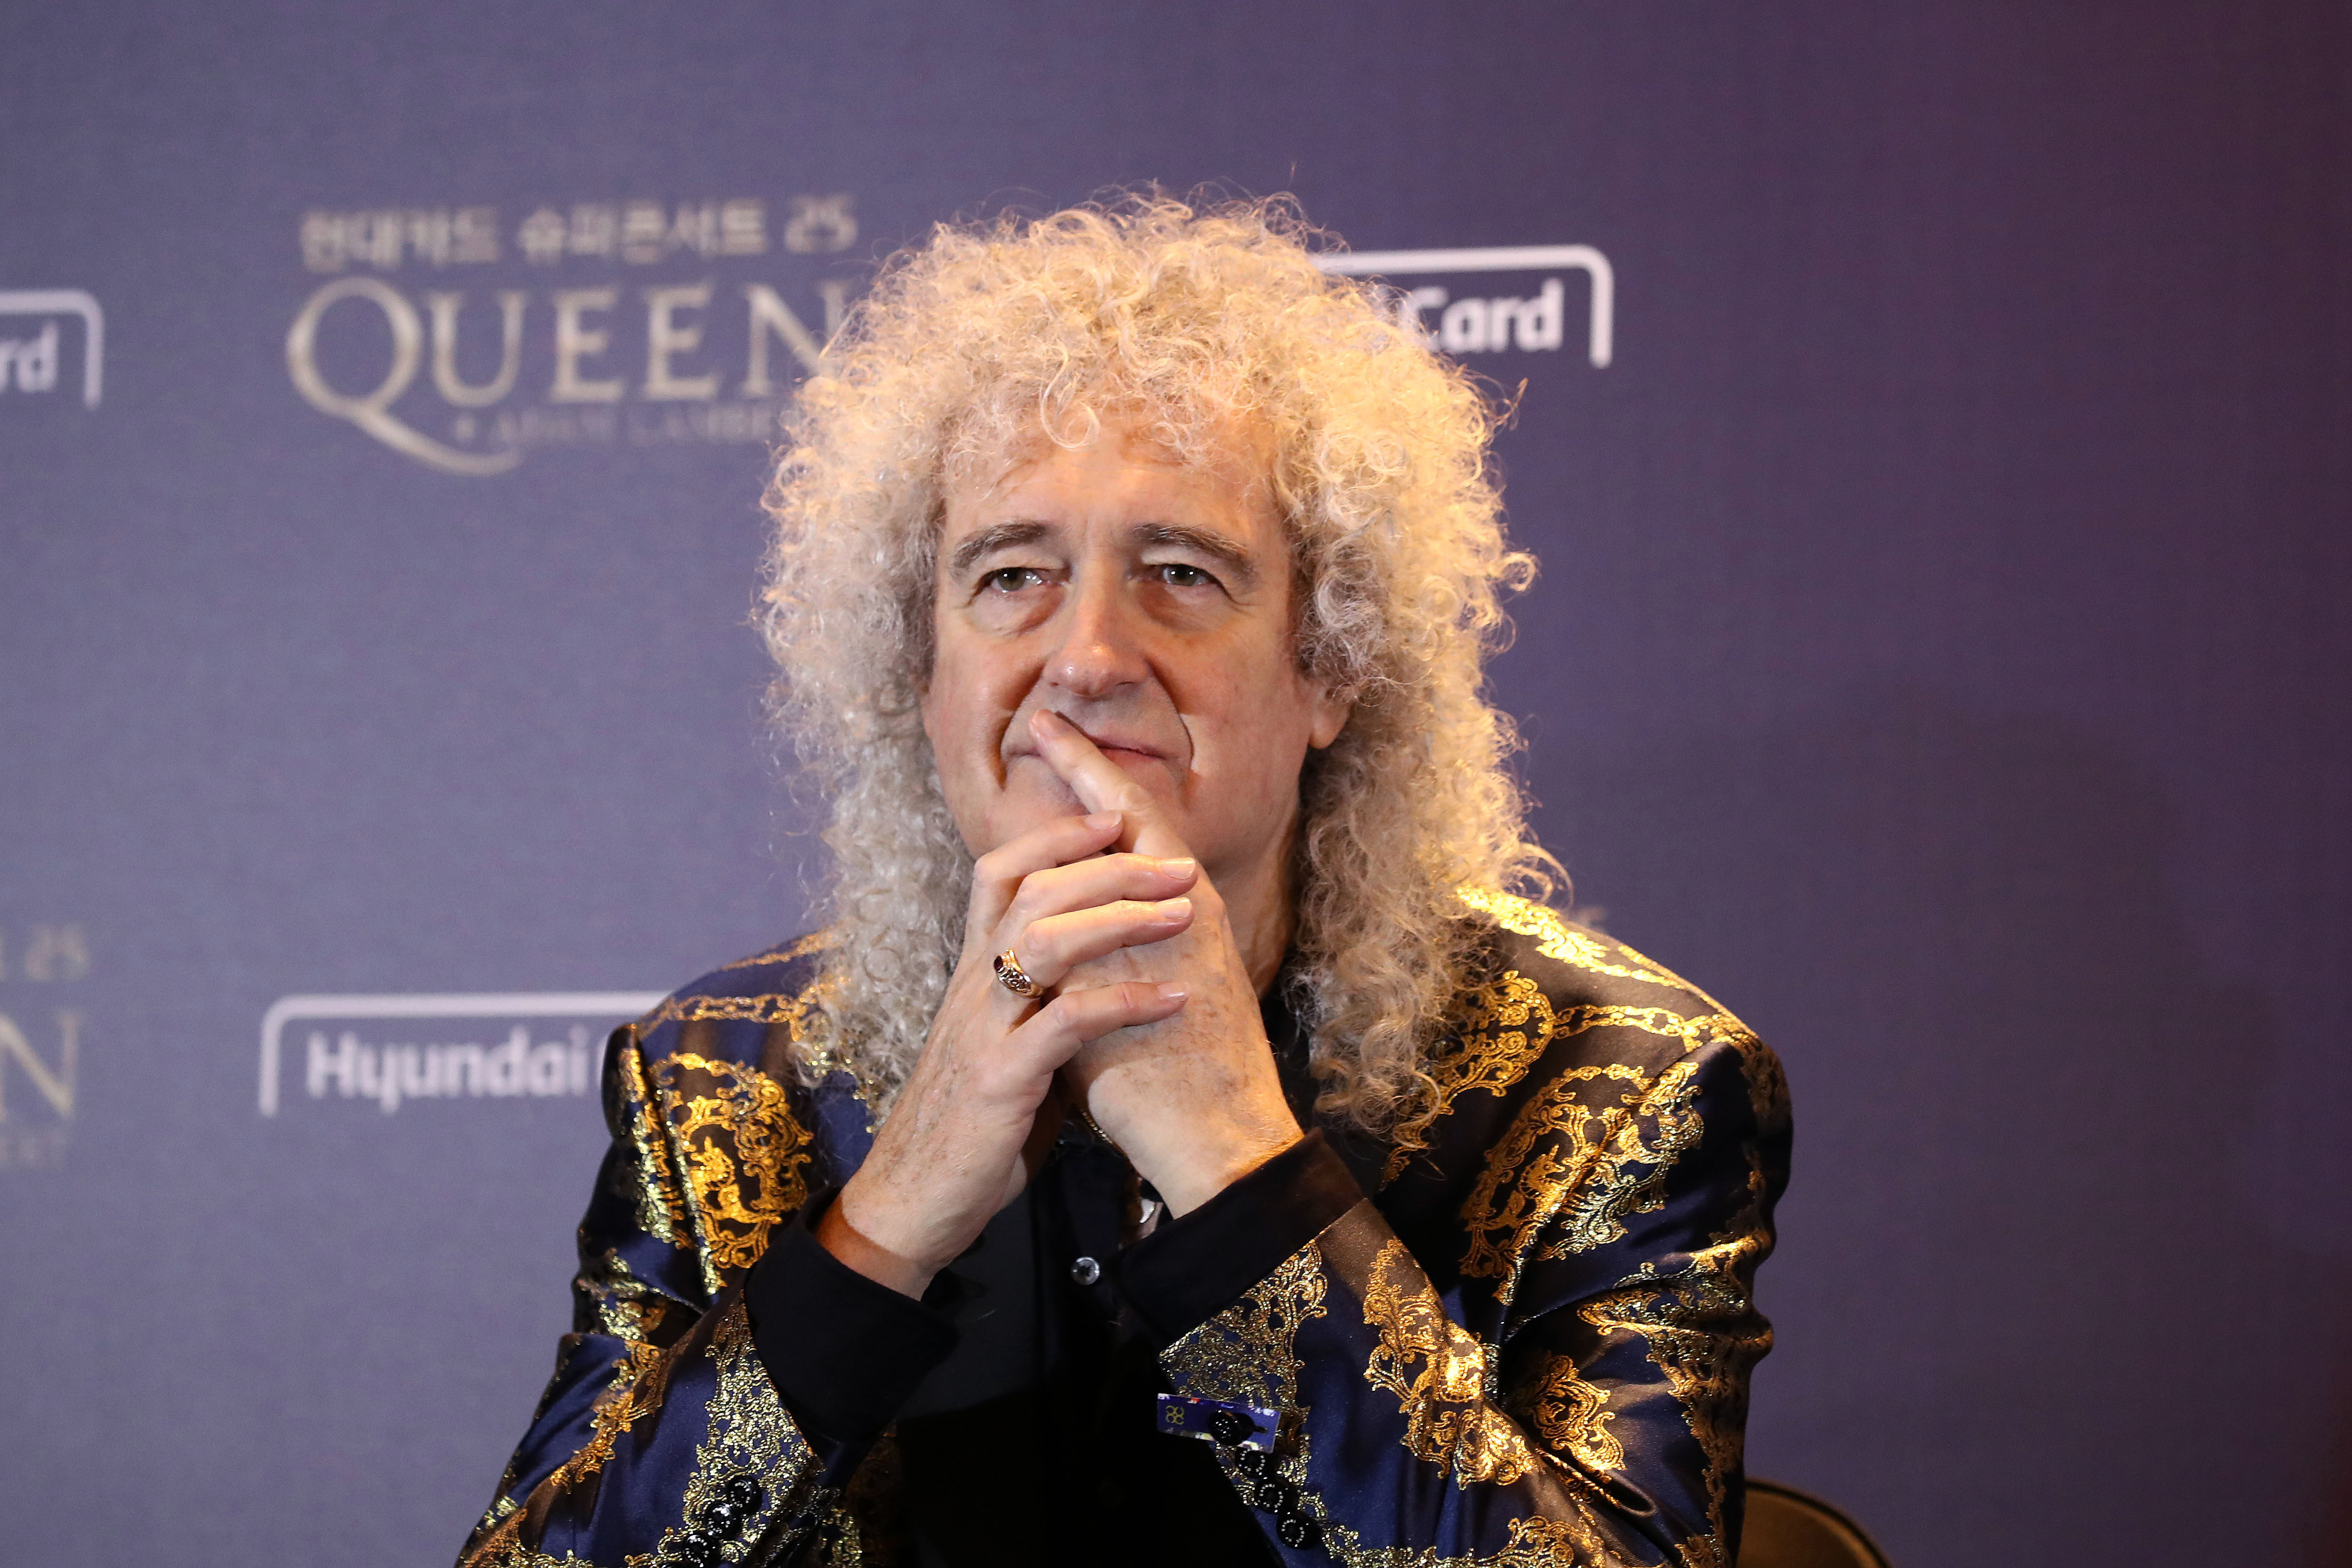 Brian May delays cricket match by landing helicopter in middle of pitch to attend Roger Taylor’s daughter’s wedding